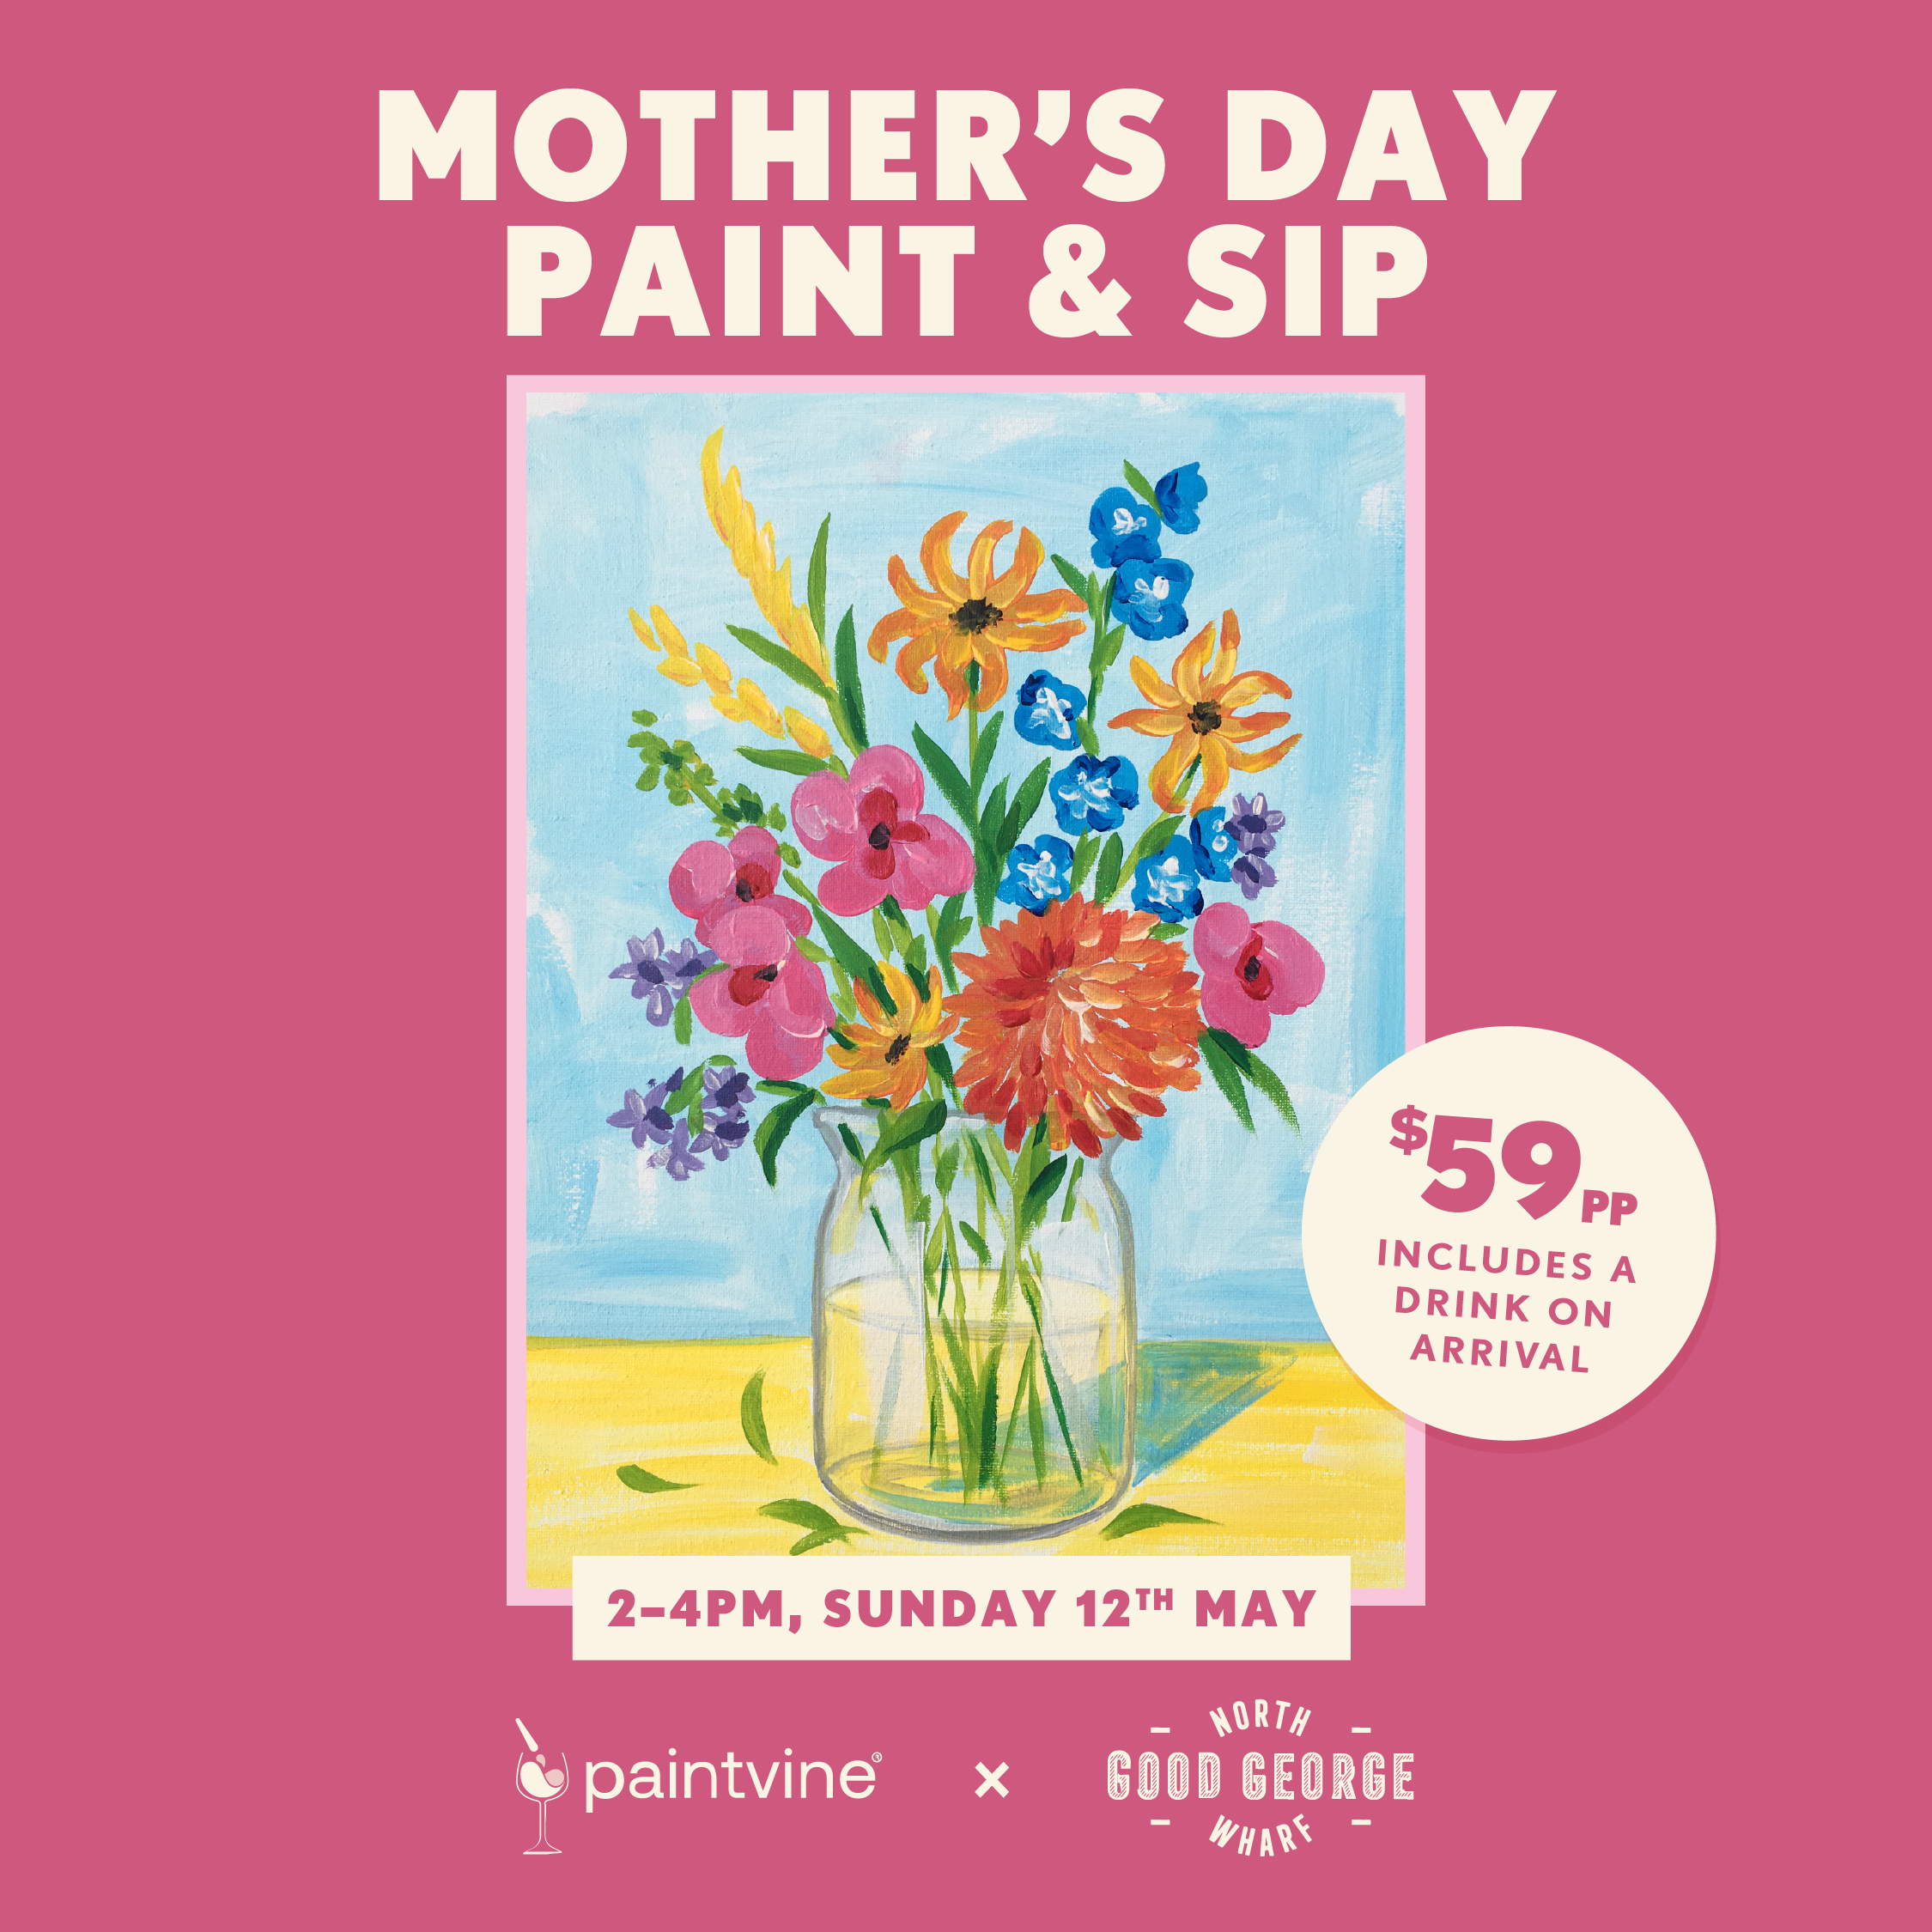 Mother's Day Paint & Sip at North Wharf